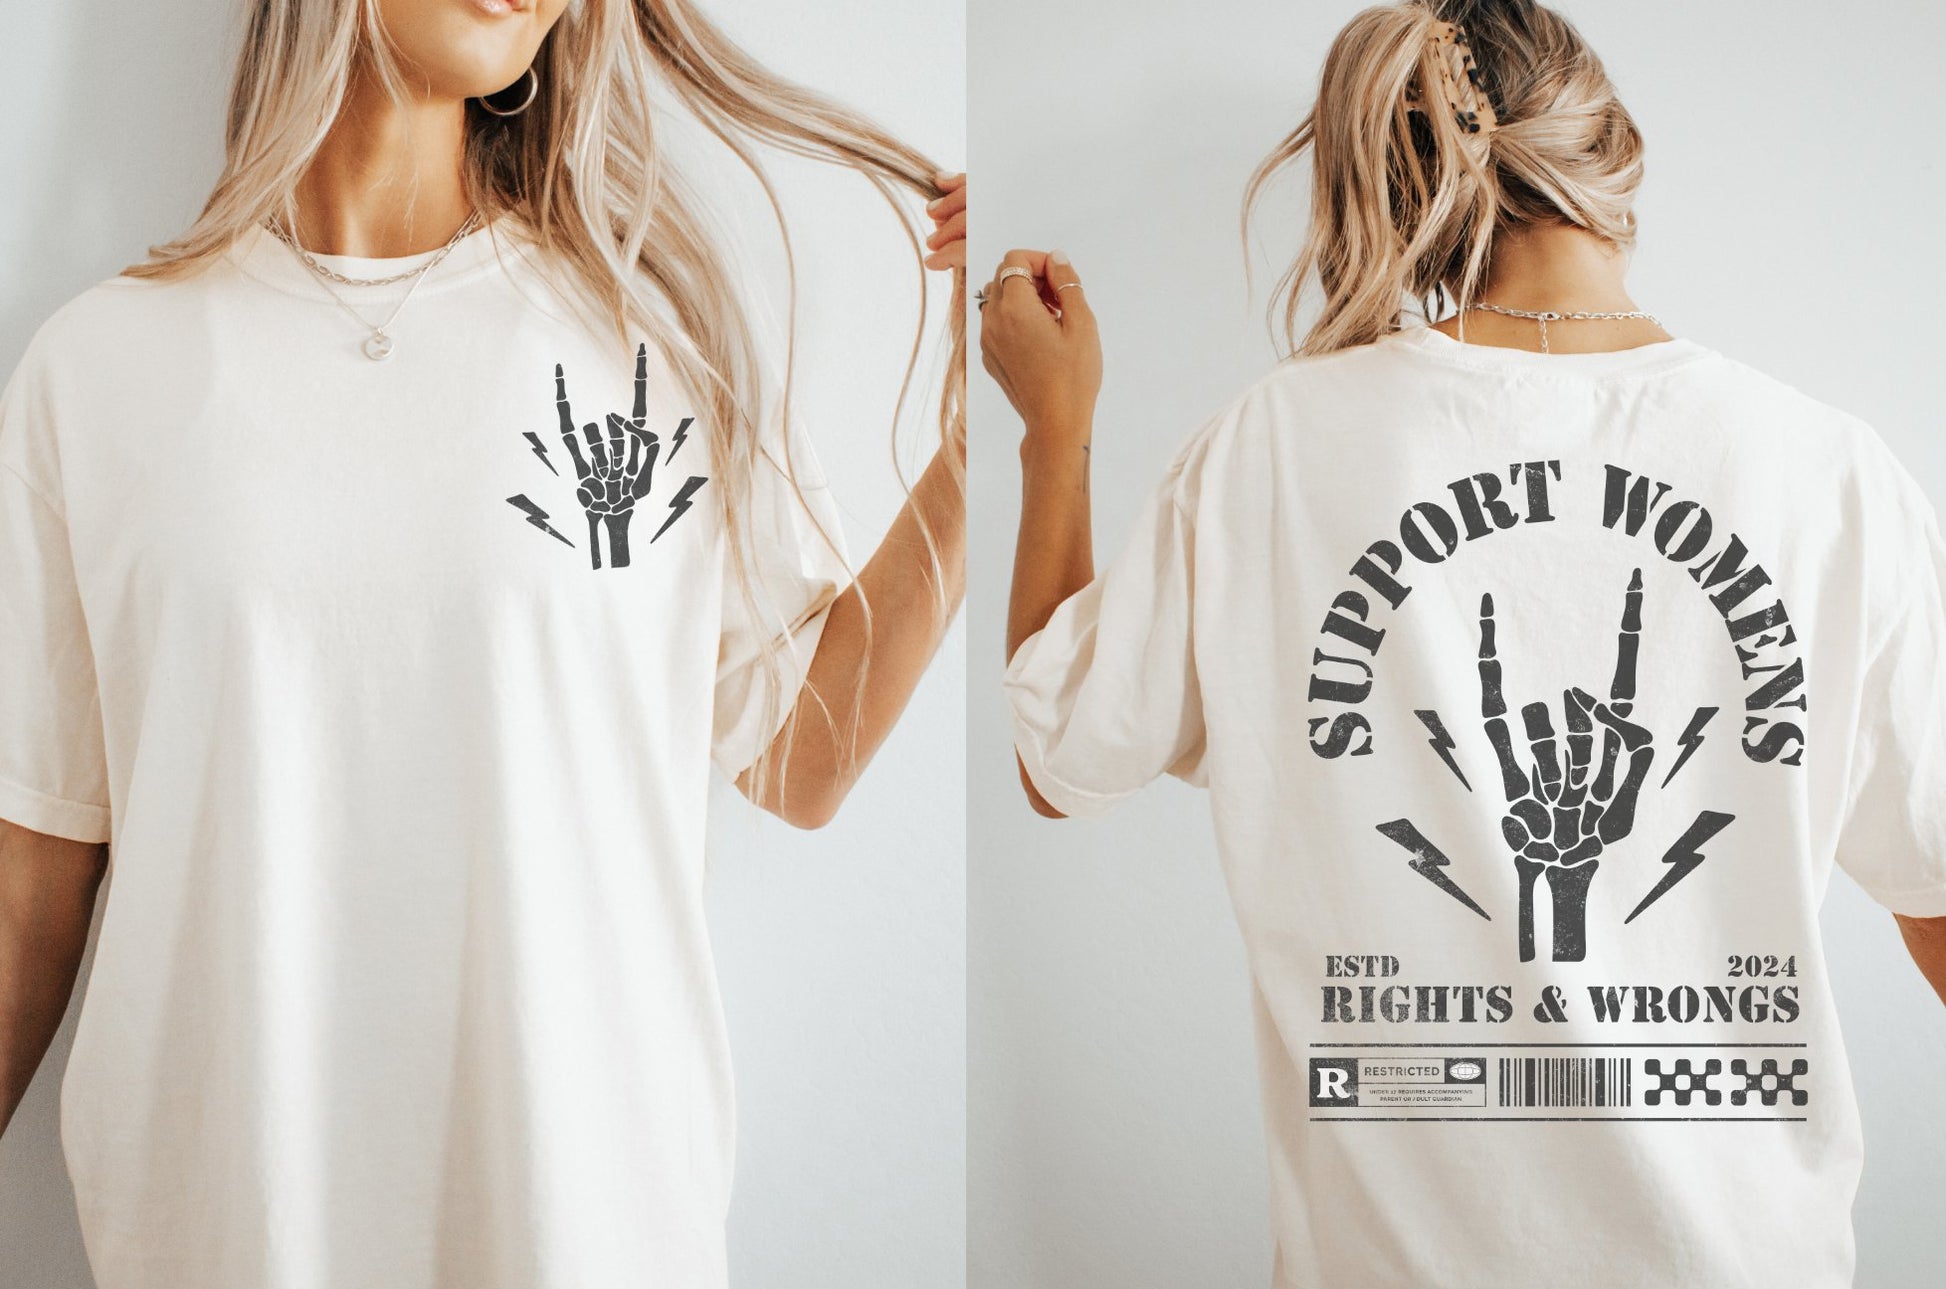 Support Womens Rights and Wrongs Tee - GingerTots - Comfort Colors Shirt - S - Ivory -